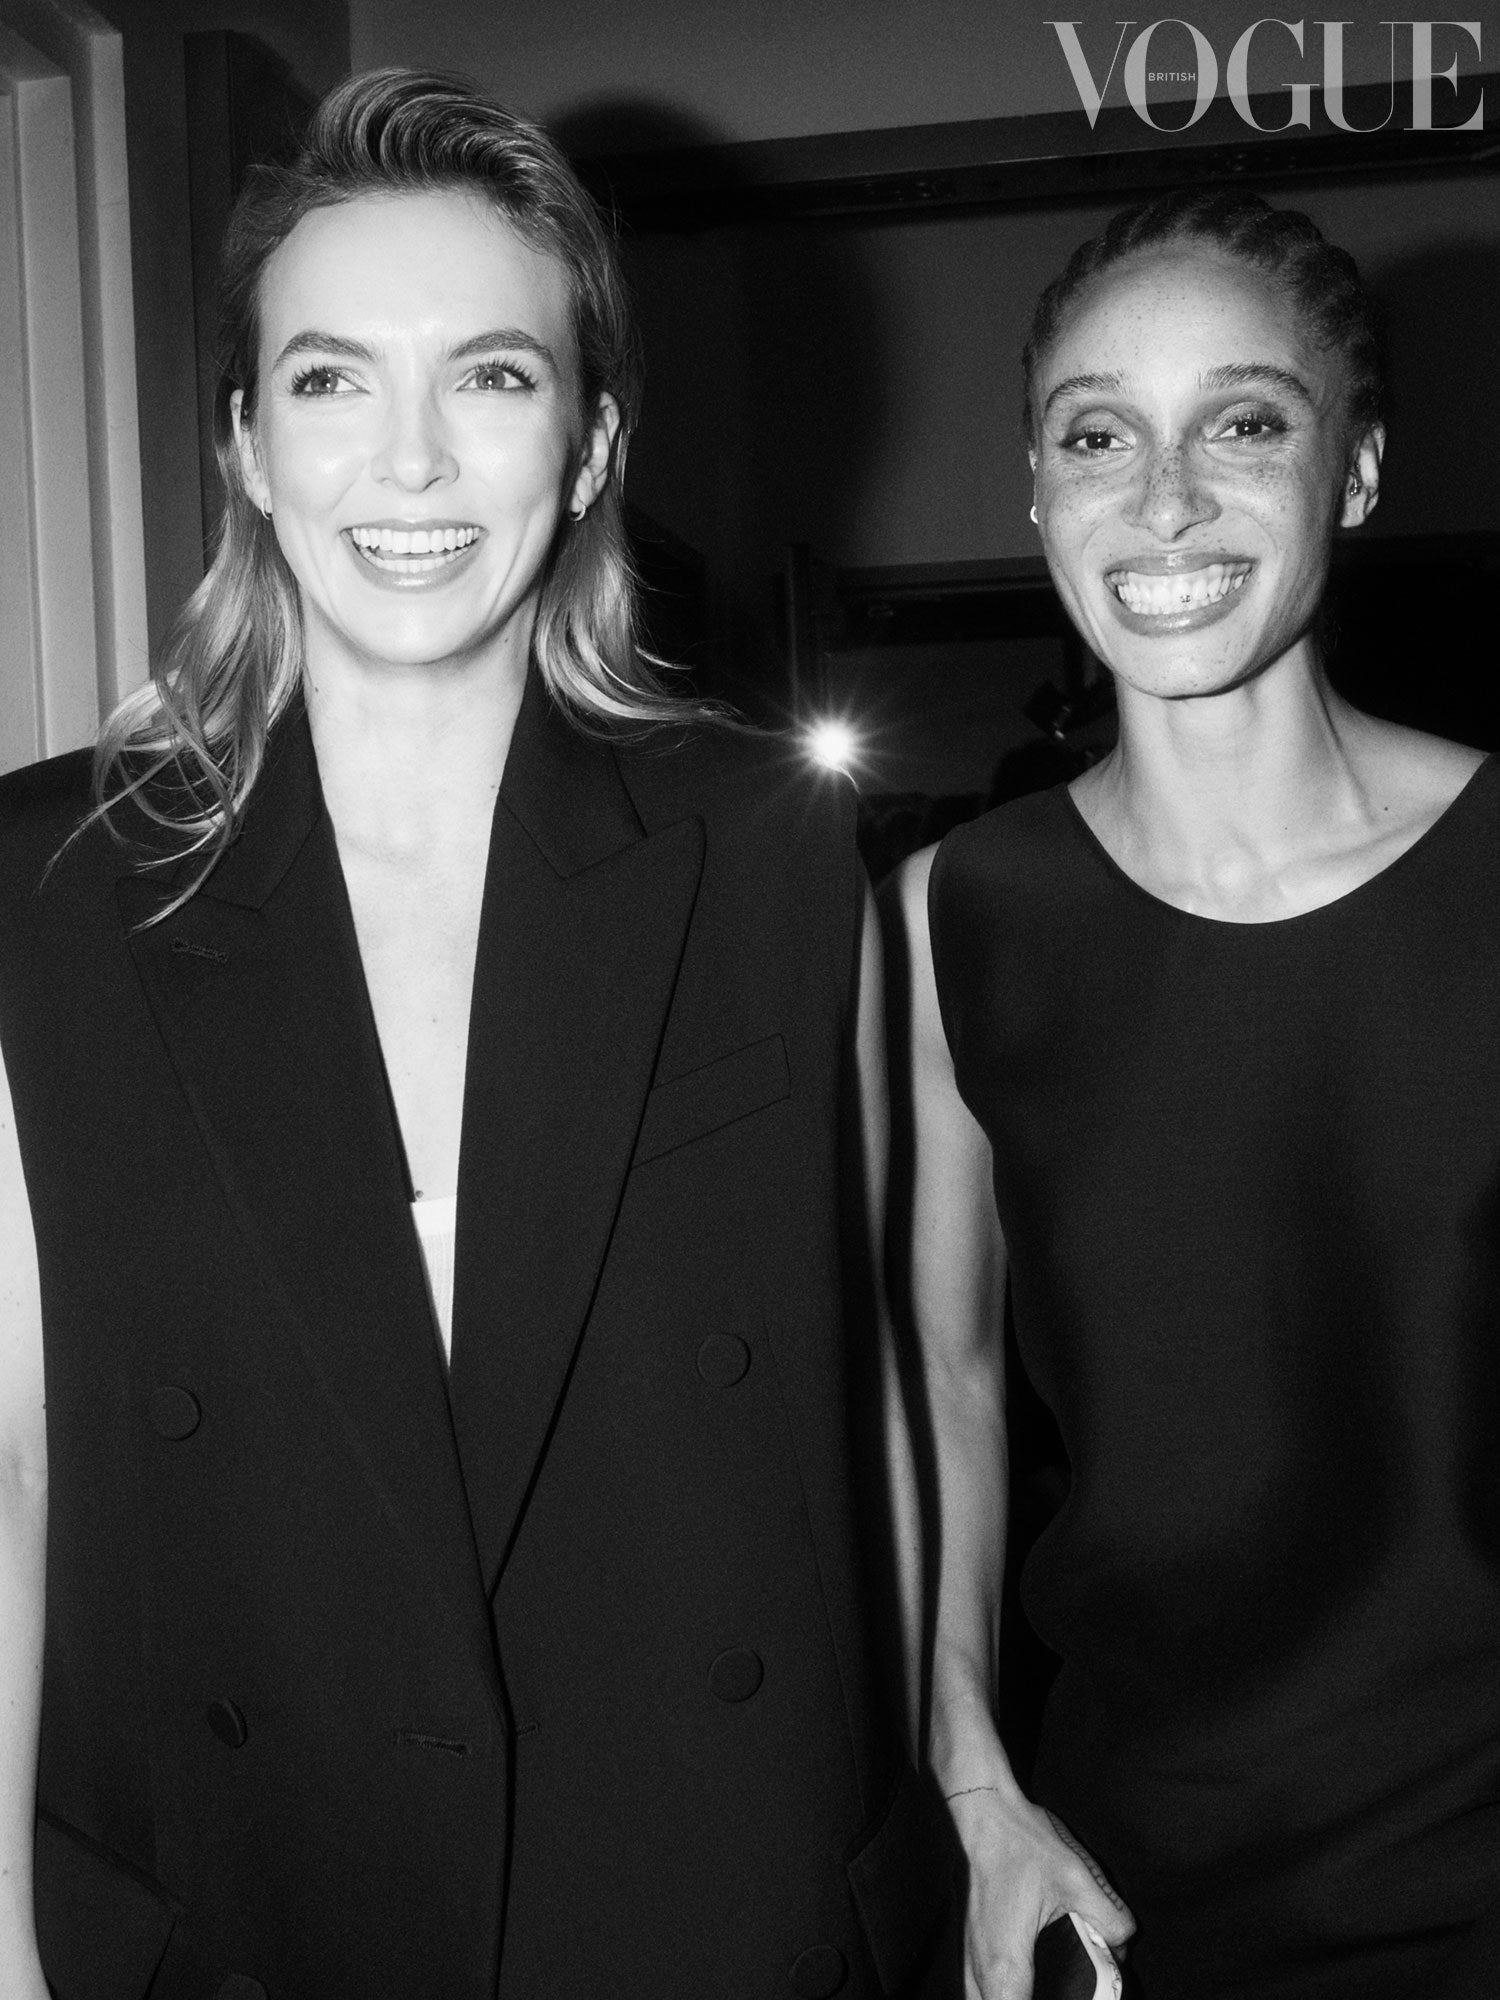 Jodie Comer with Adowa Aboah, Enninful’s first Vogue cover star in 2017